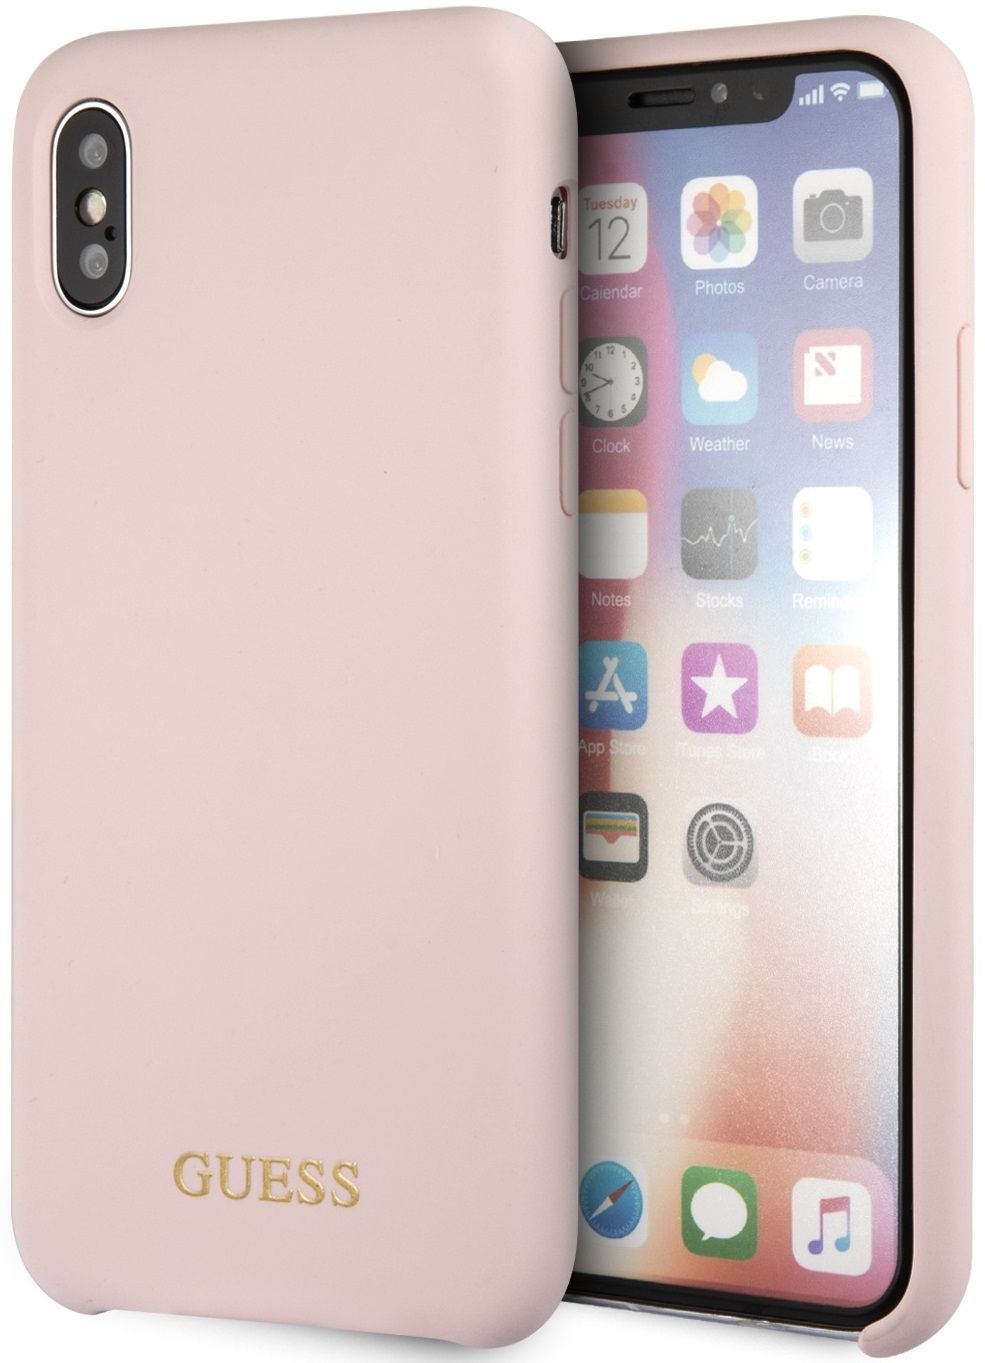 Чехол GUESS iPhone X/XS Silicone Collection светло-розовый, картинка 1